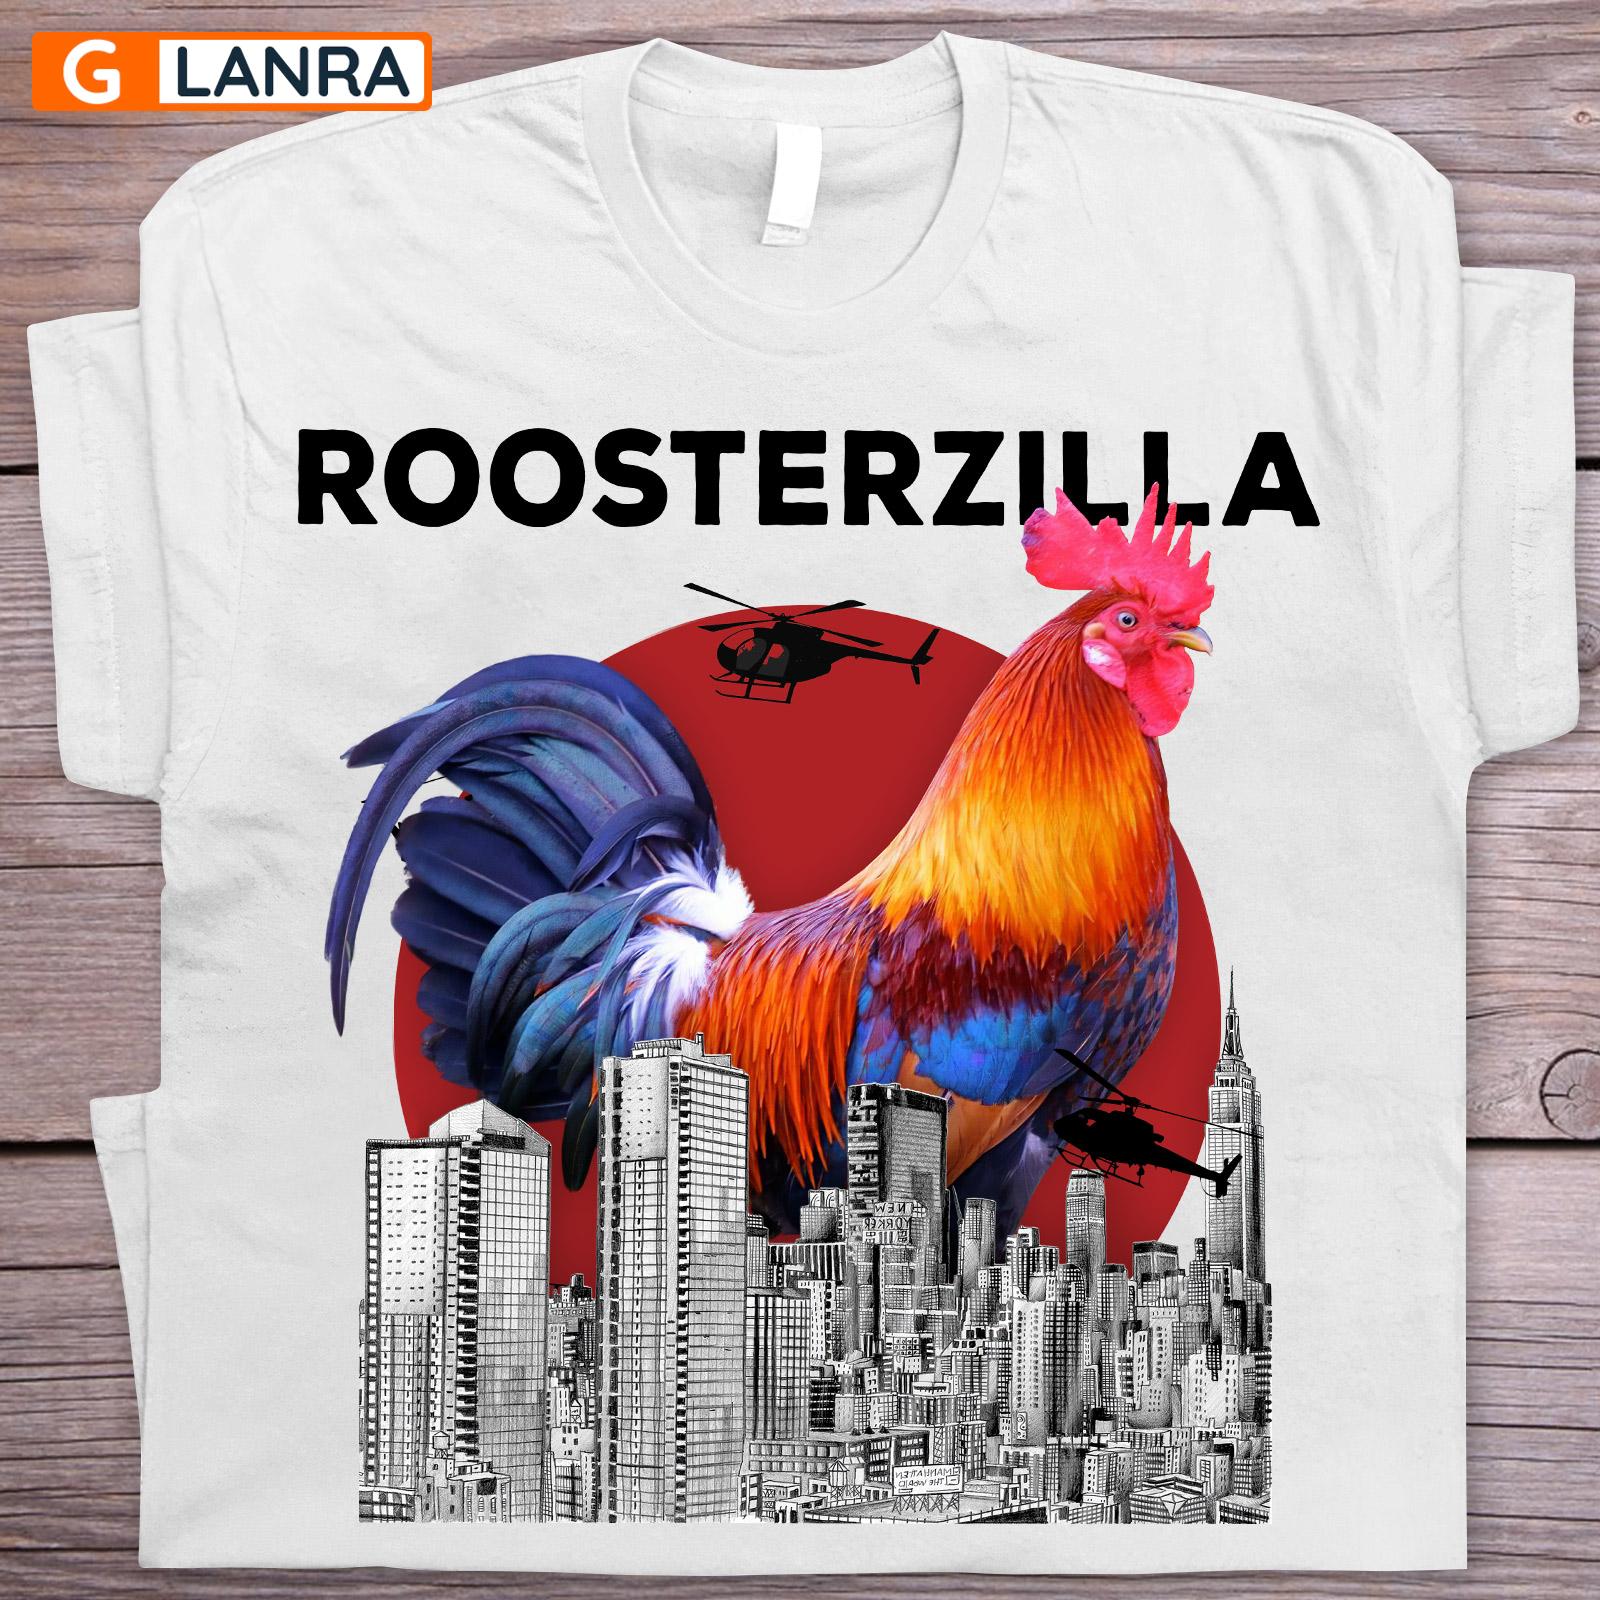 Roosterzilla Shirt, Rooster Shirt, Rooster Farm Shirt, Farm Animal Shirt, Rooster With Skyscraper And Helicopter Shirt, T-Shirt, Tee